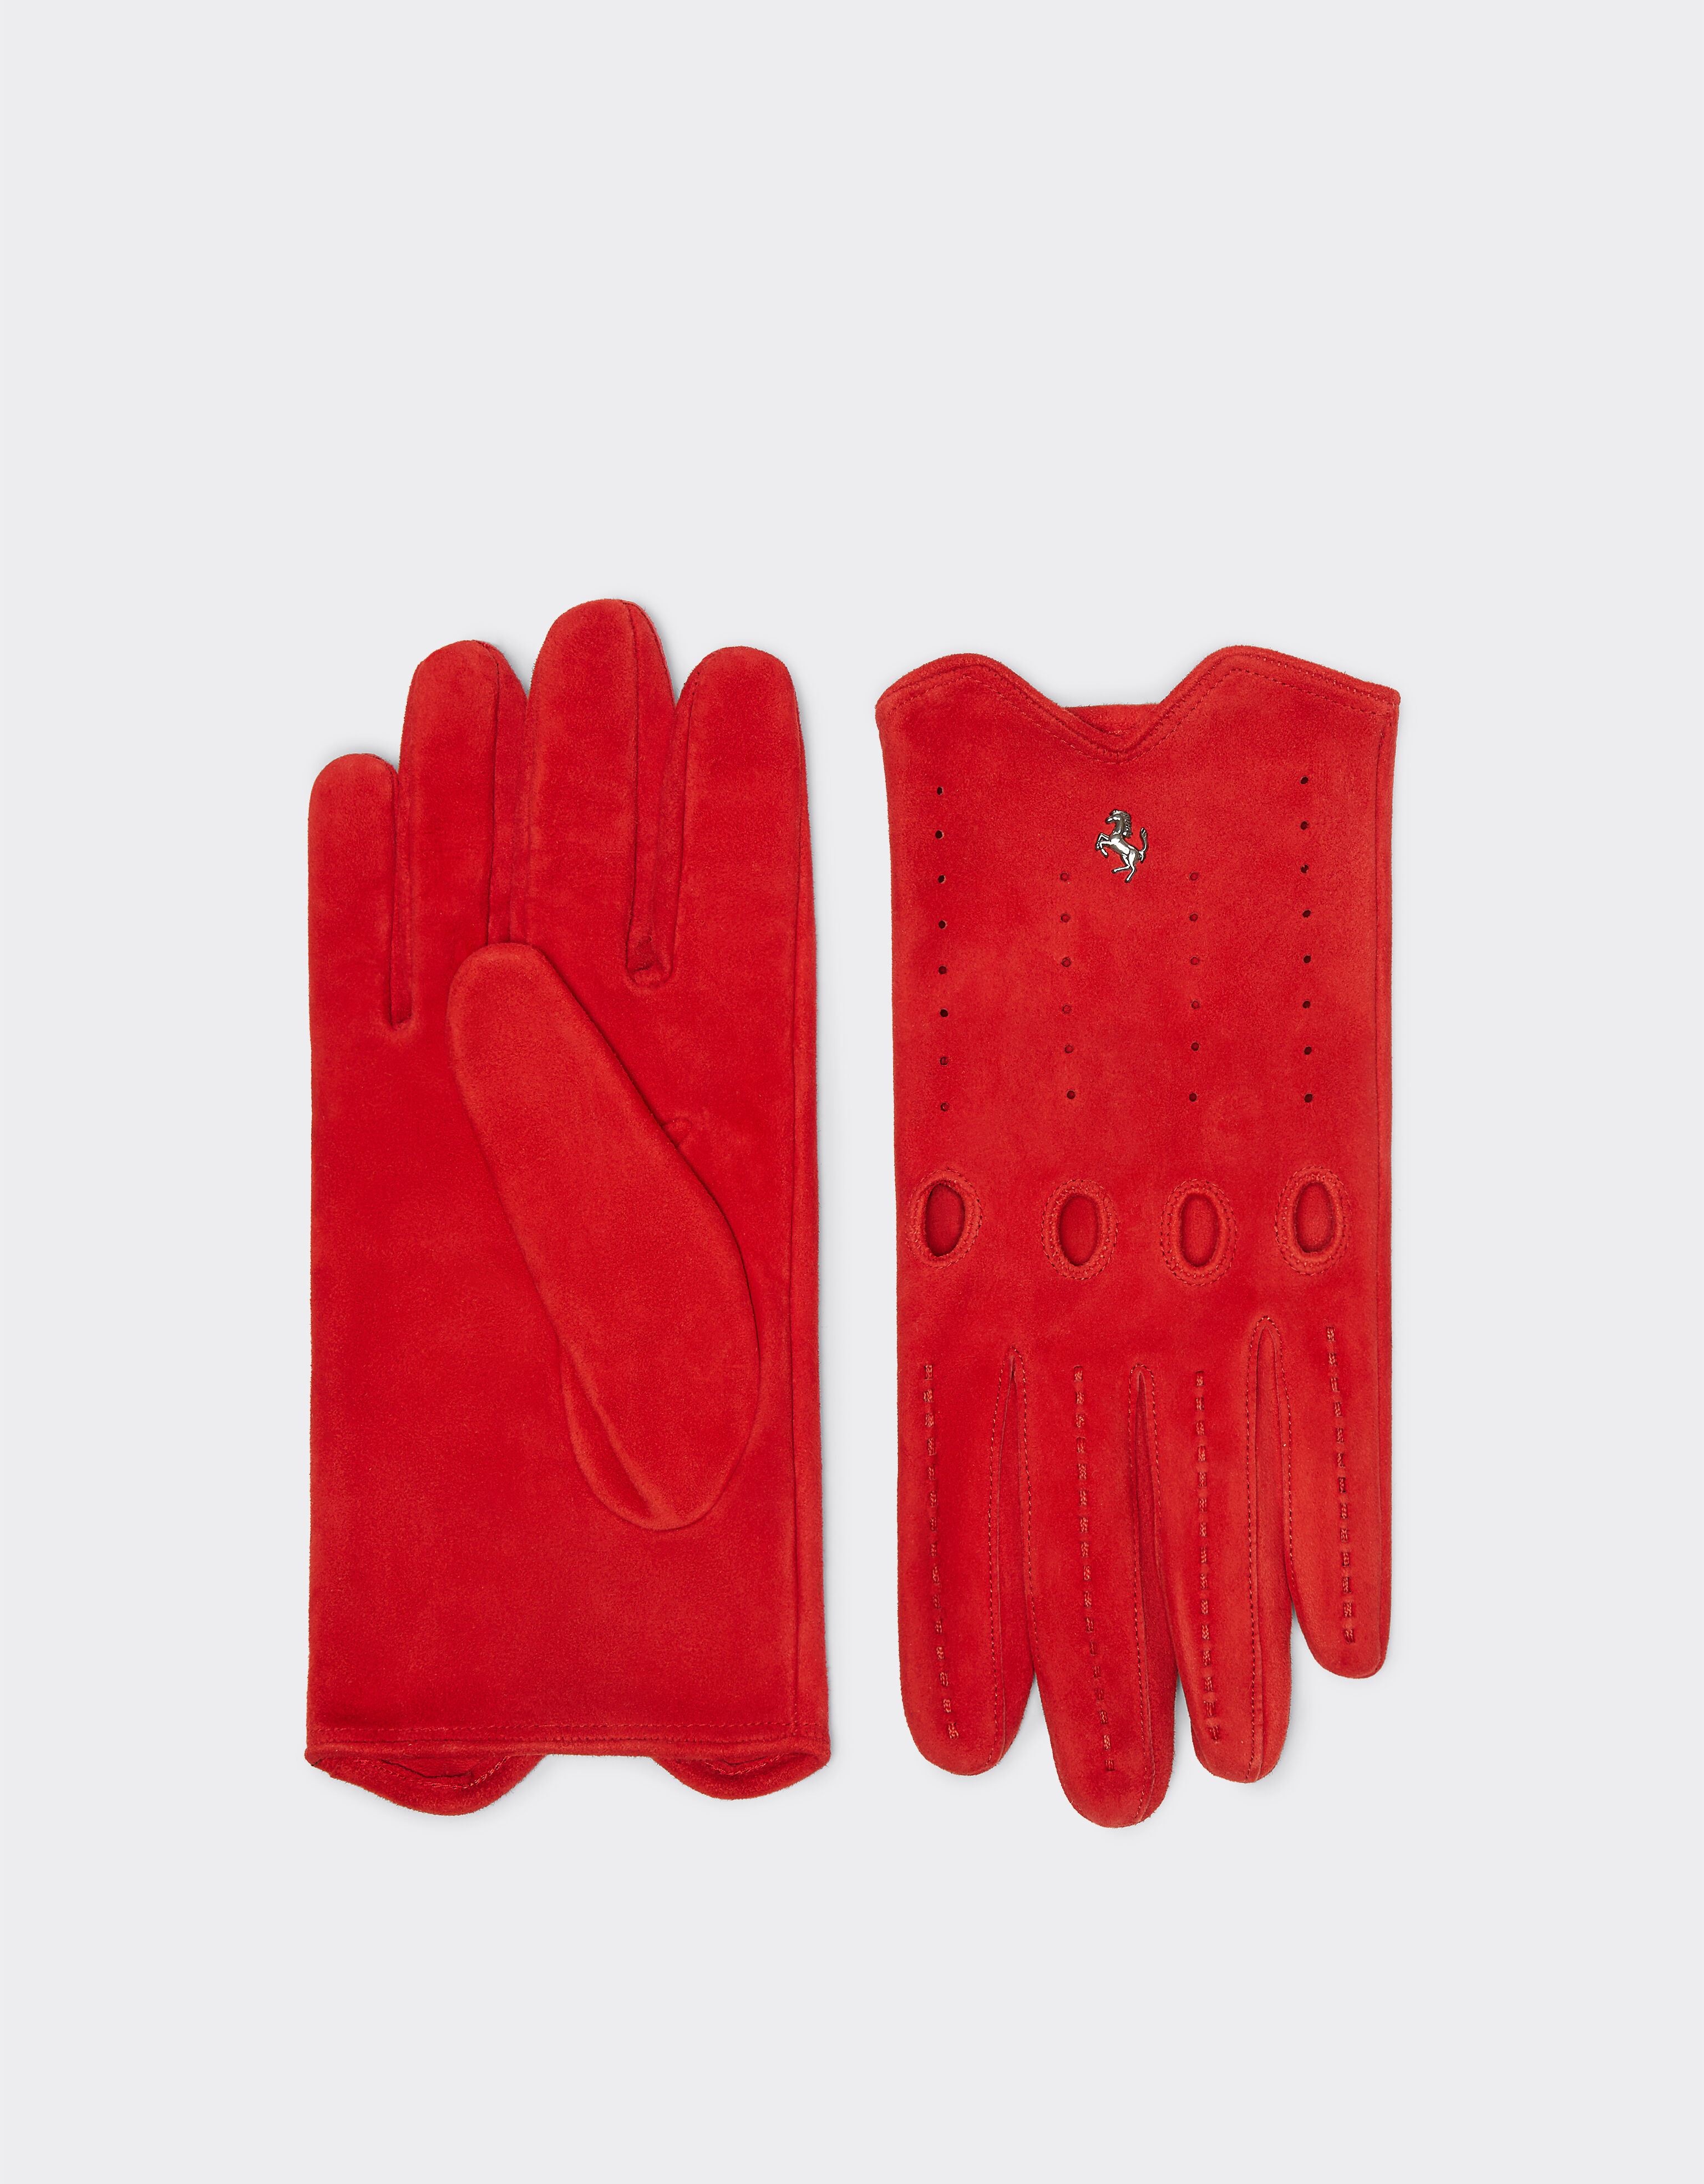 Ferrari Driving gloves in nappa leather and suede Rosso Corsa 47148f